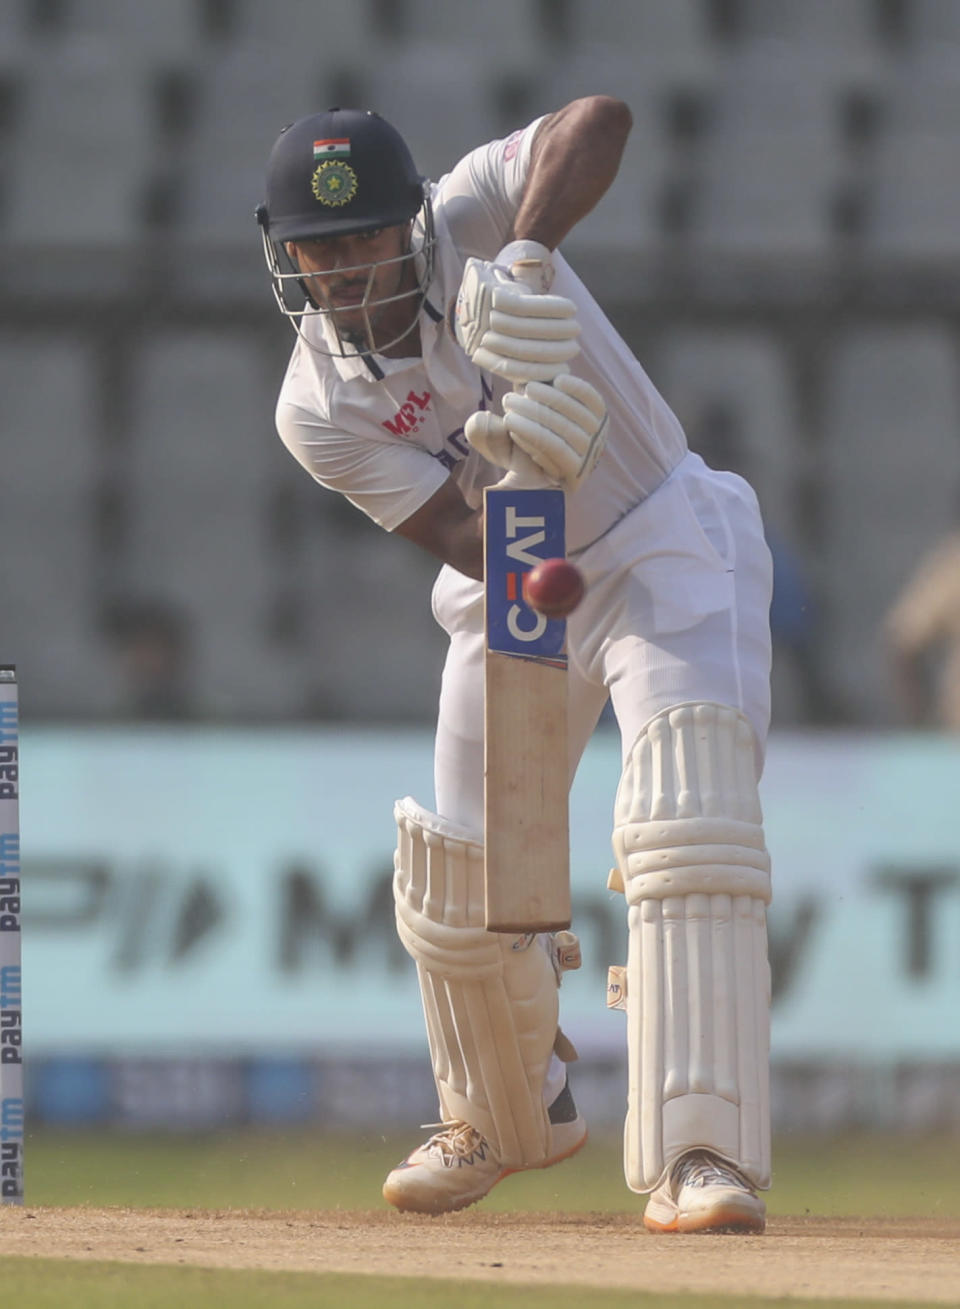 India's Mayank Agarwal plays shot during the day three of their second test cricket match with New Zealand in Mumbai, India, Sunday, Dec. 5, 2021.(AP Photo/Rafiq Maqbool)